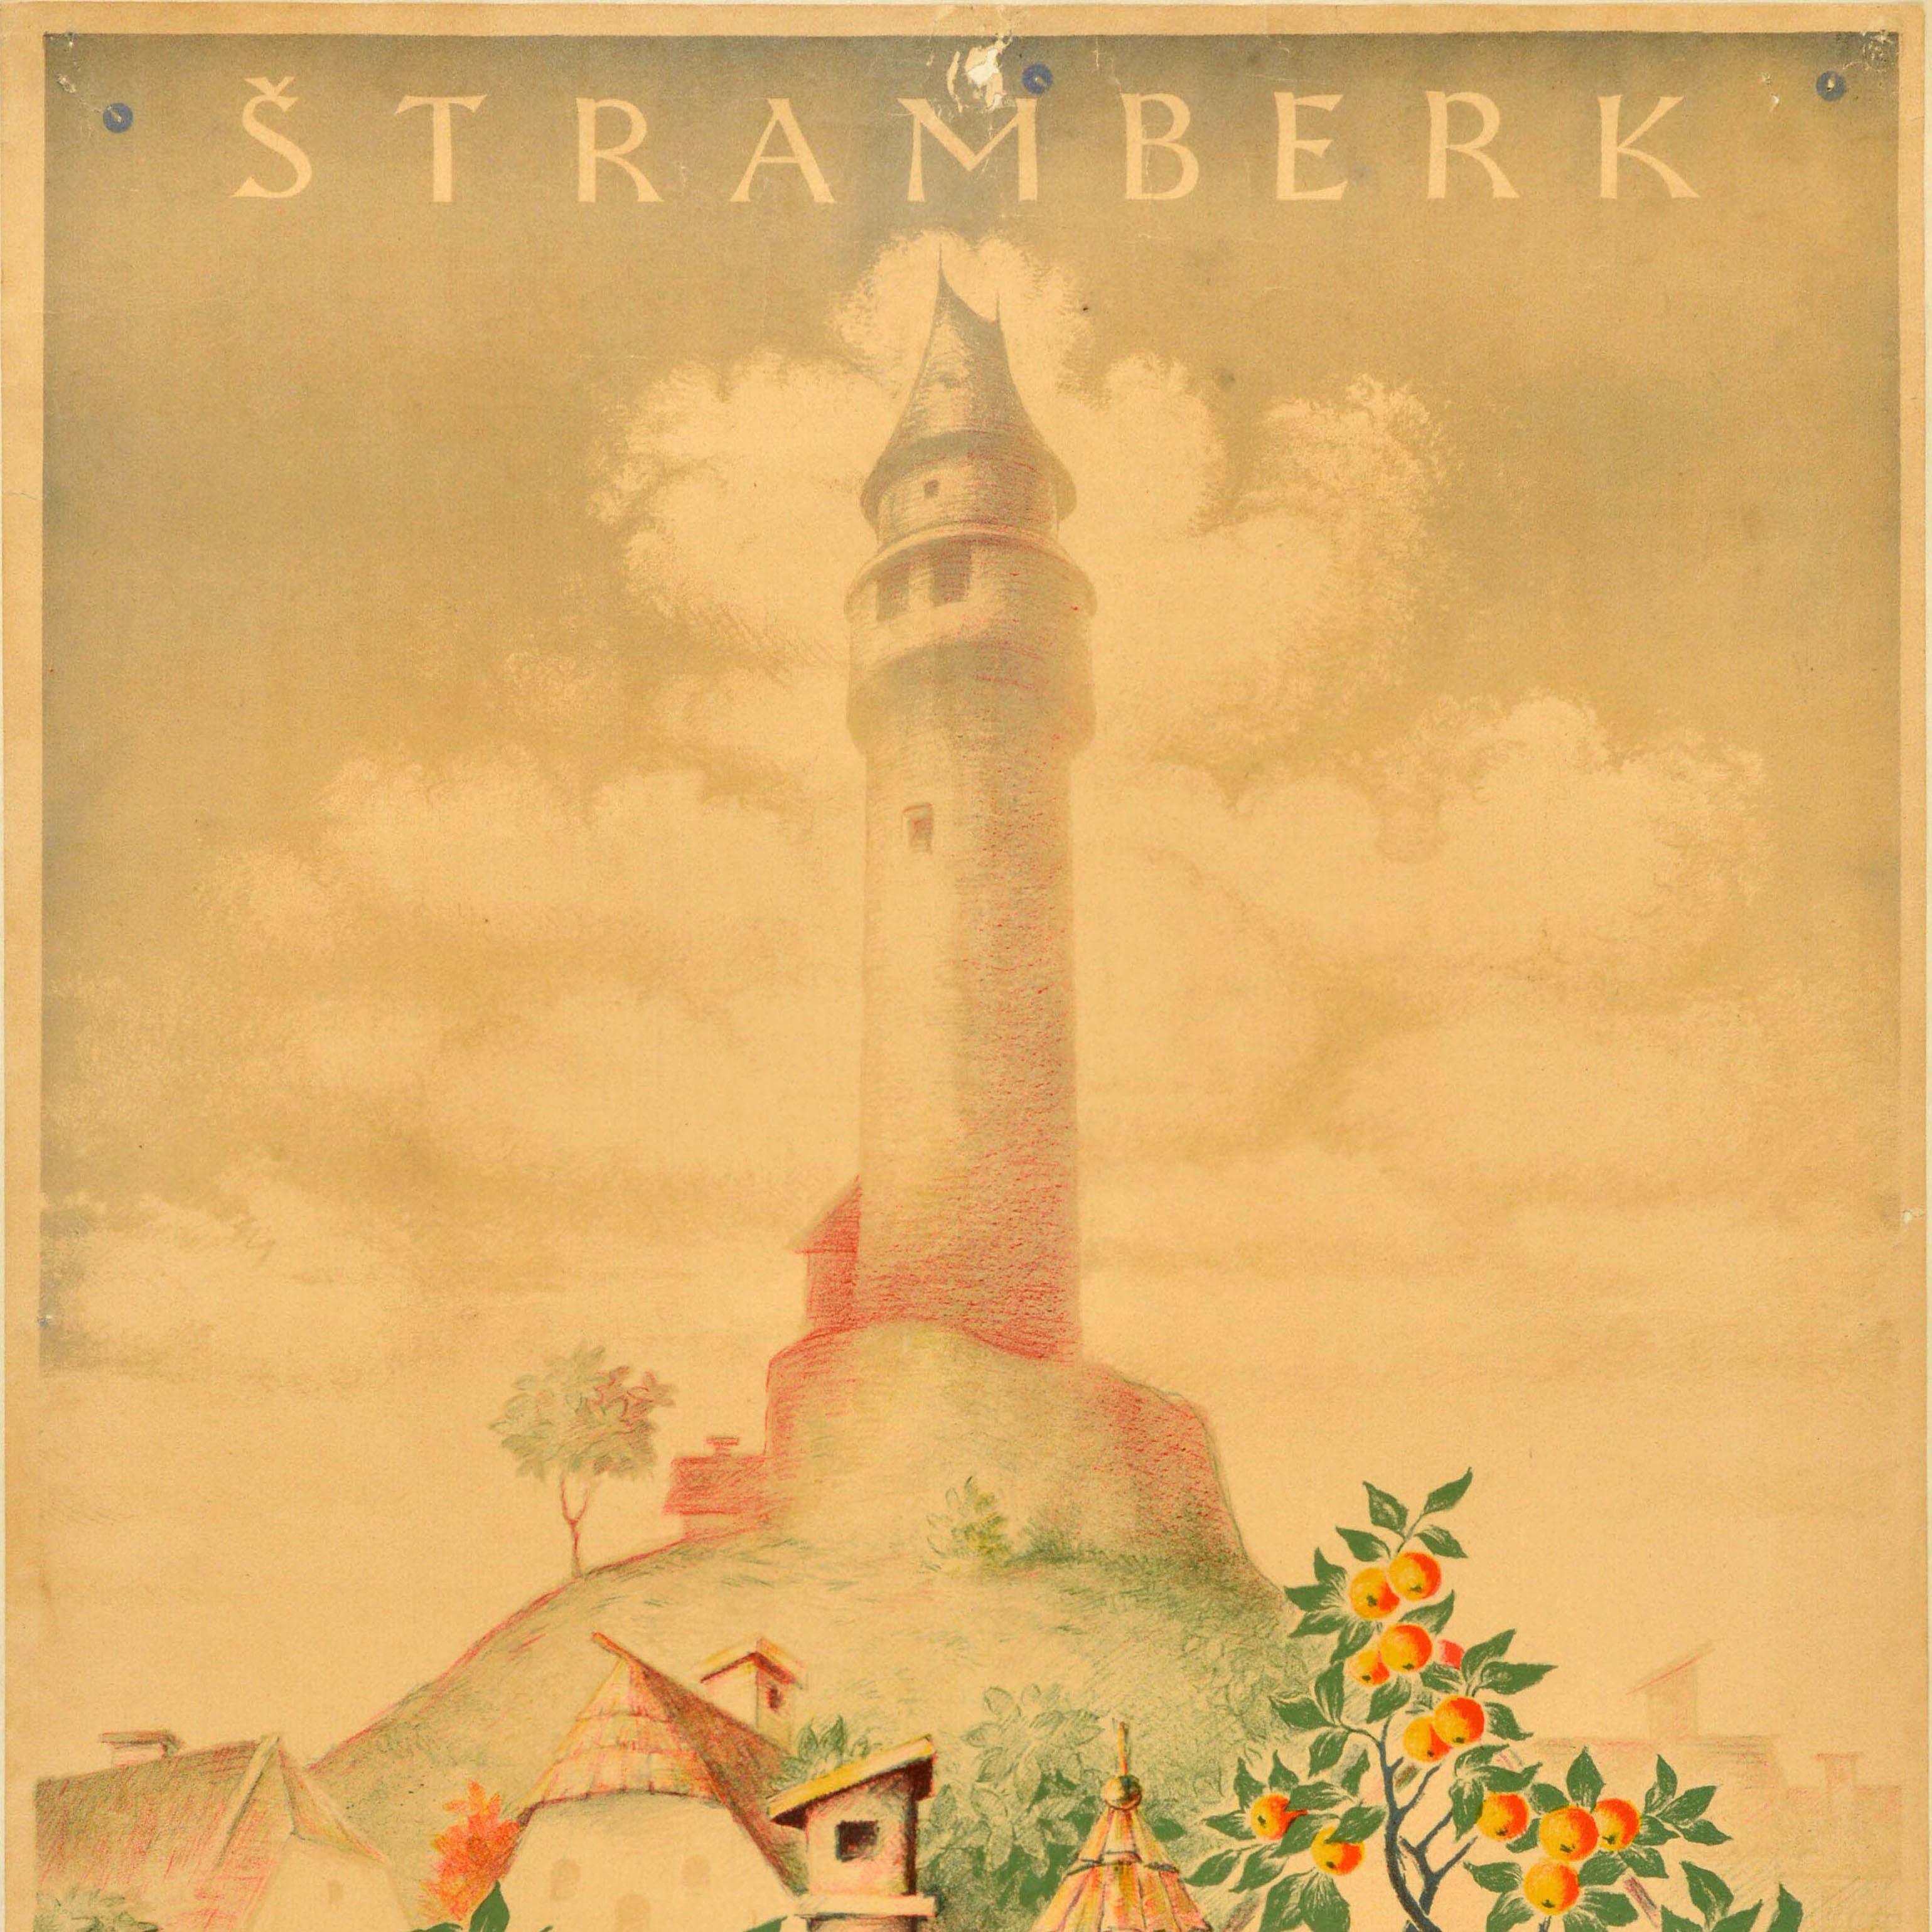 Original vintage train travel advertising poster for Stramberk Chemins de Fer de l'Etat Tchccoslovaque / Czechoslovak State Railways featuring a scenic illustration of a quaint village house with flowers on the window sills, sunflowers in the garden